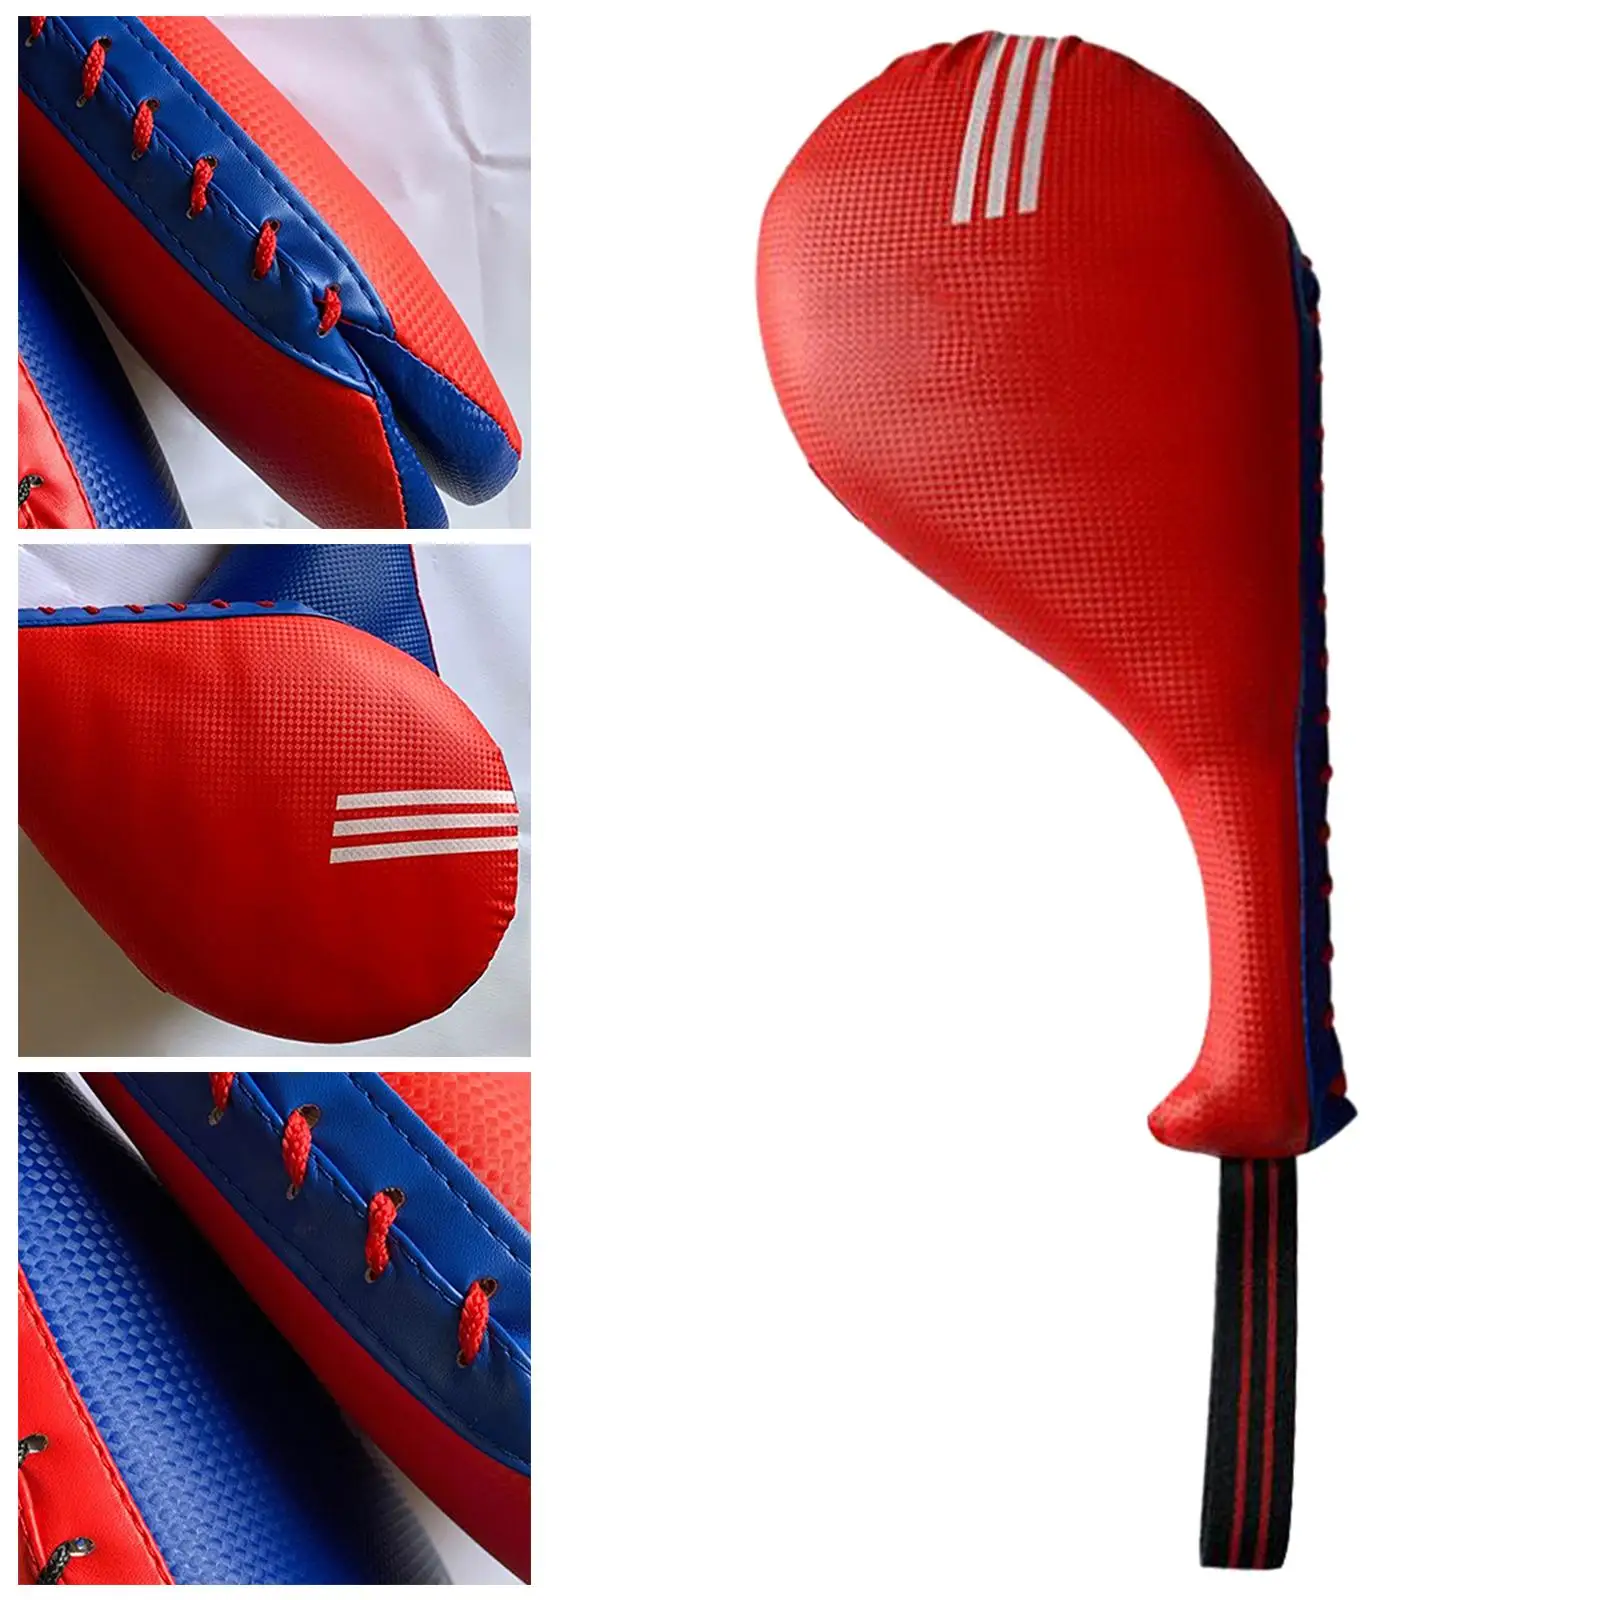 Striking Pad Double Face for Kicking Target Kickboxing Kickboxing Training Strike Pad Target Martial Arts Sporting Goods